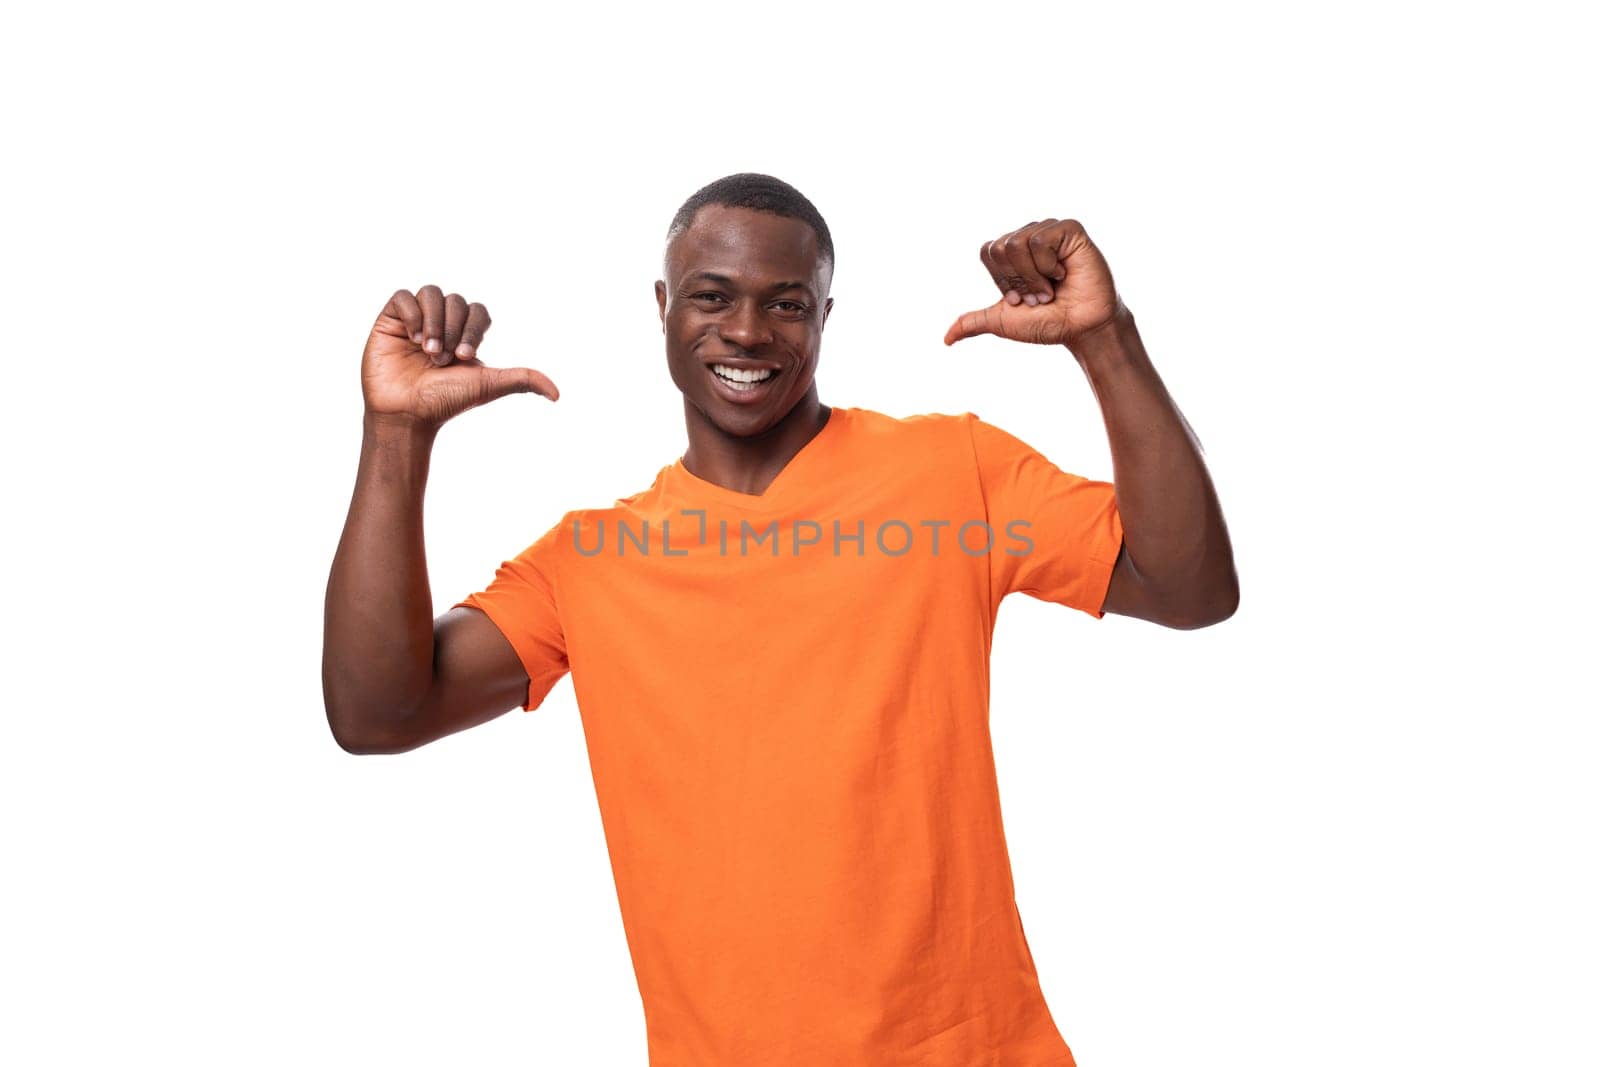 young nice kind american man dressed in an orange t-shirt on a white background with copy space by TRMK